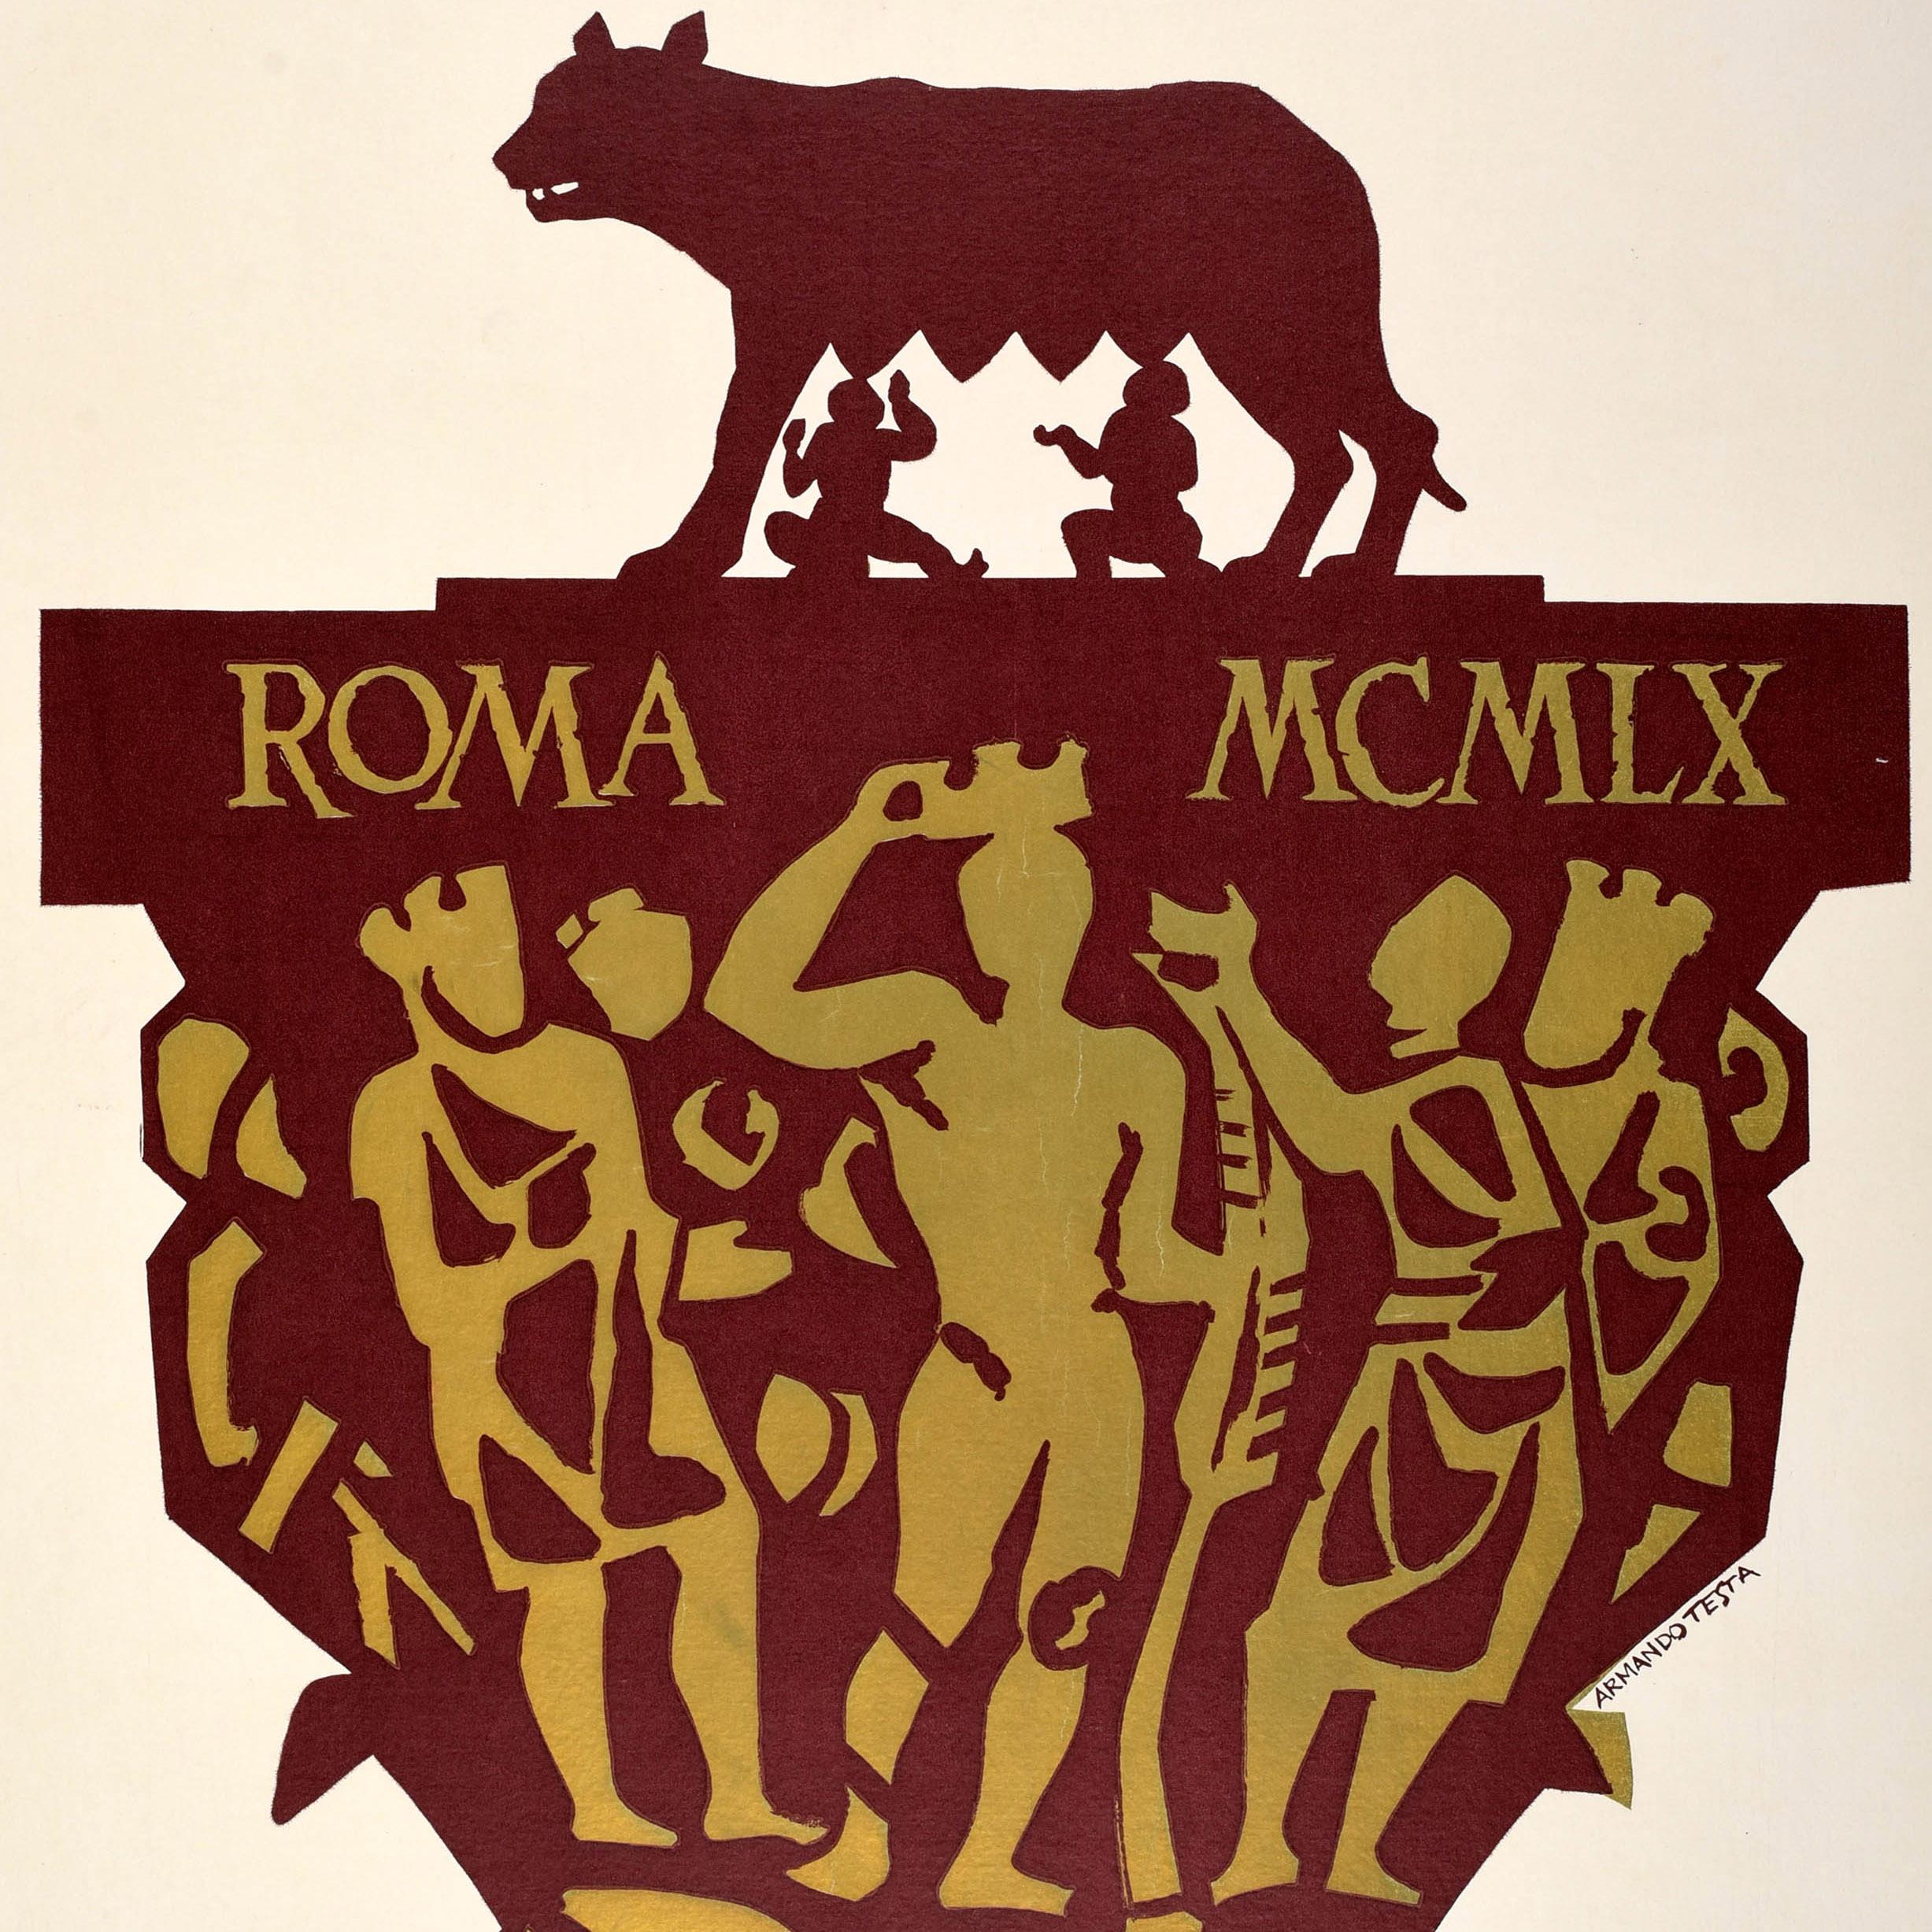 Very scarce original vintage sport poster for the XVII Olympic Games in Rome featuring a great design by Armando Testa (1917-1992) with a Russian text. Design depicts the twin brothers Romulus and Remus being suckled by the Capitoline Wolf (the